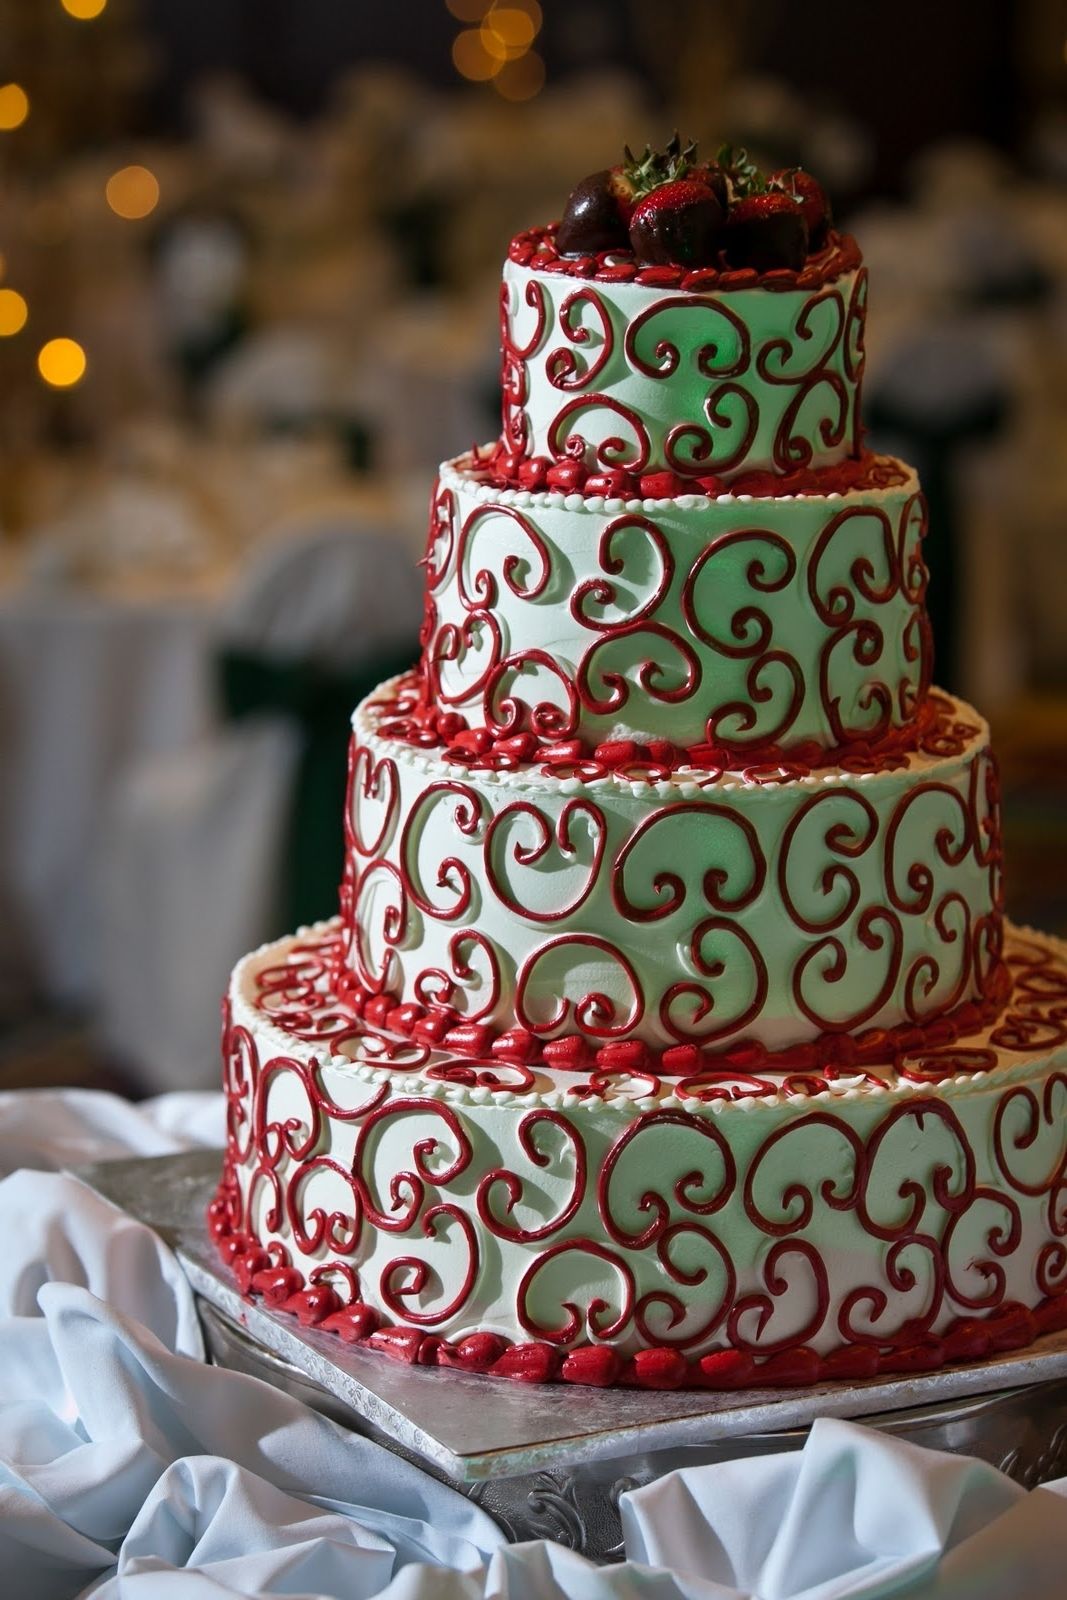 Indulge in Delicious Delights Unveiling the Exquisite Italian Wedding Cakes at Publix